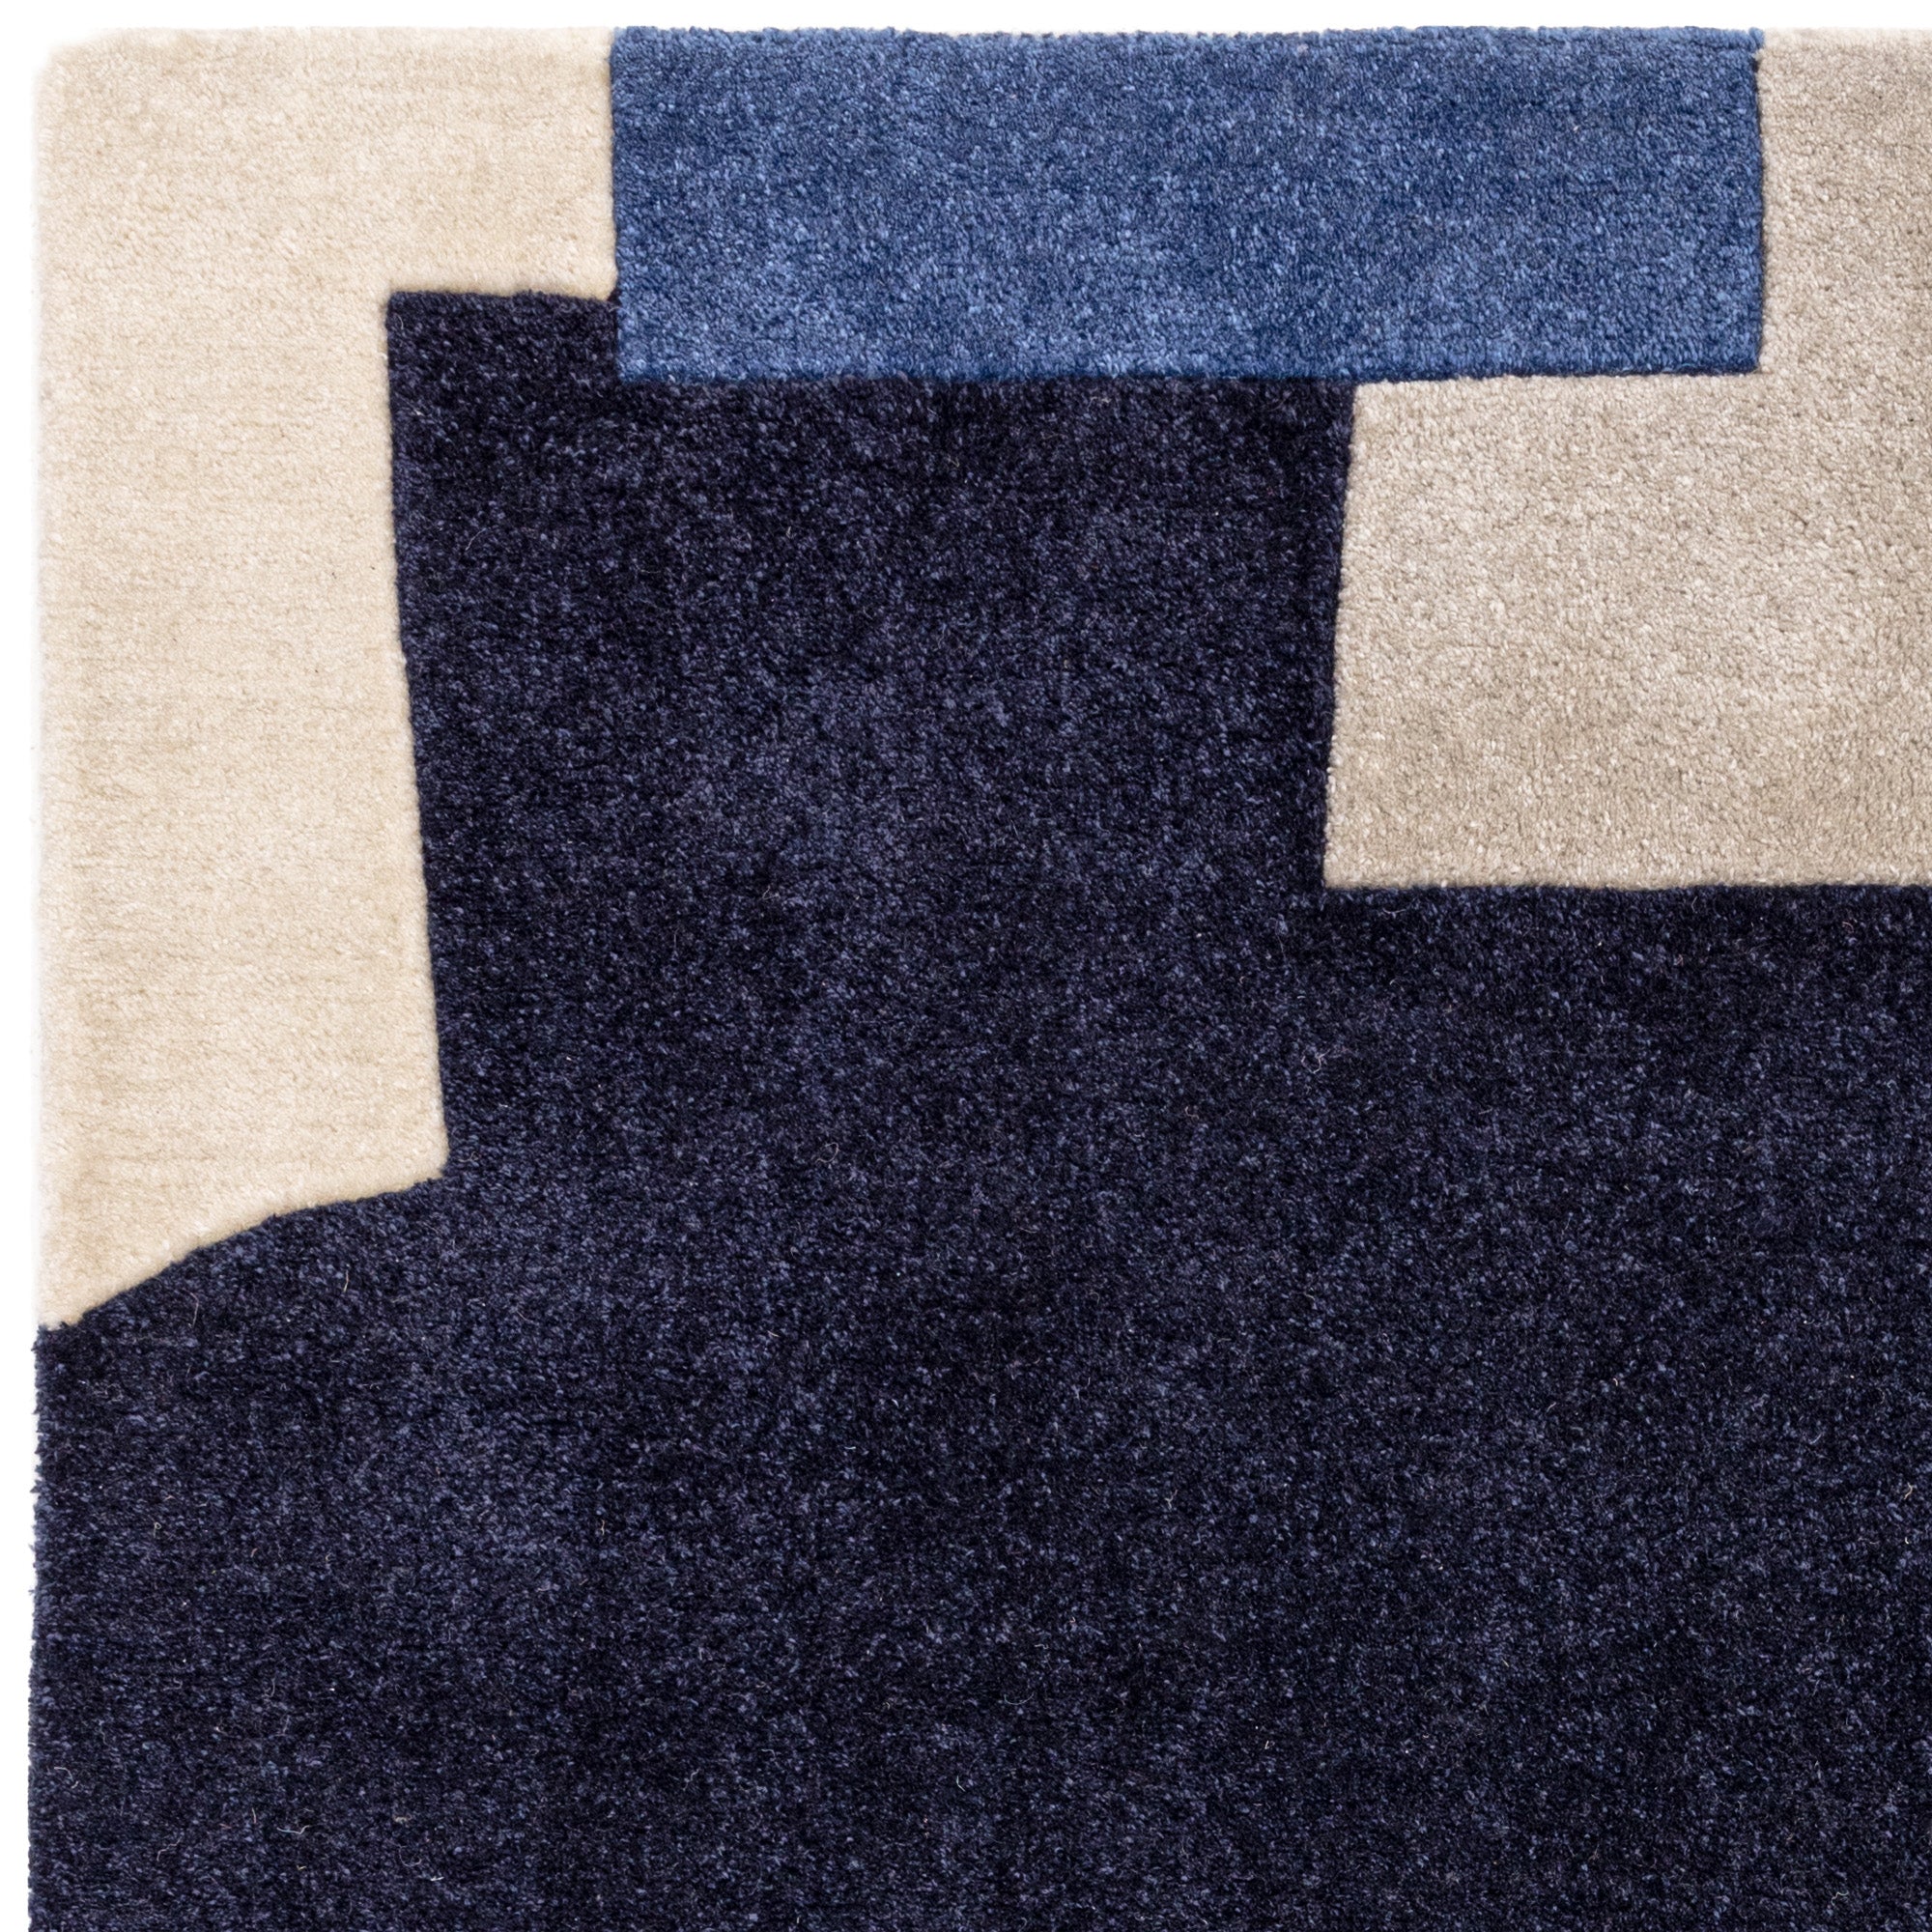 Multicolour rug with abstract pattern in blue, grey, and cream tones